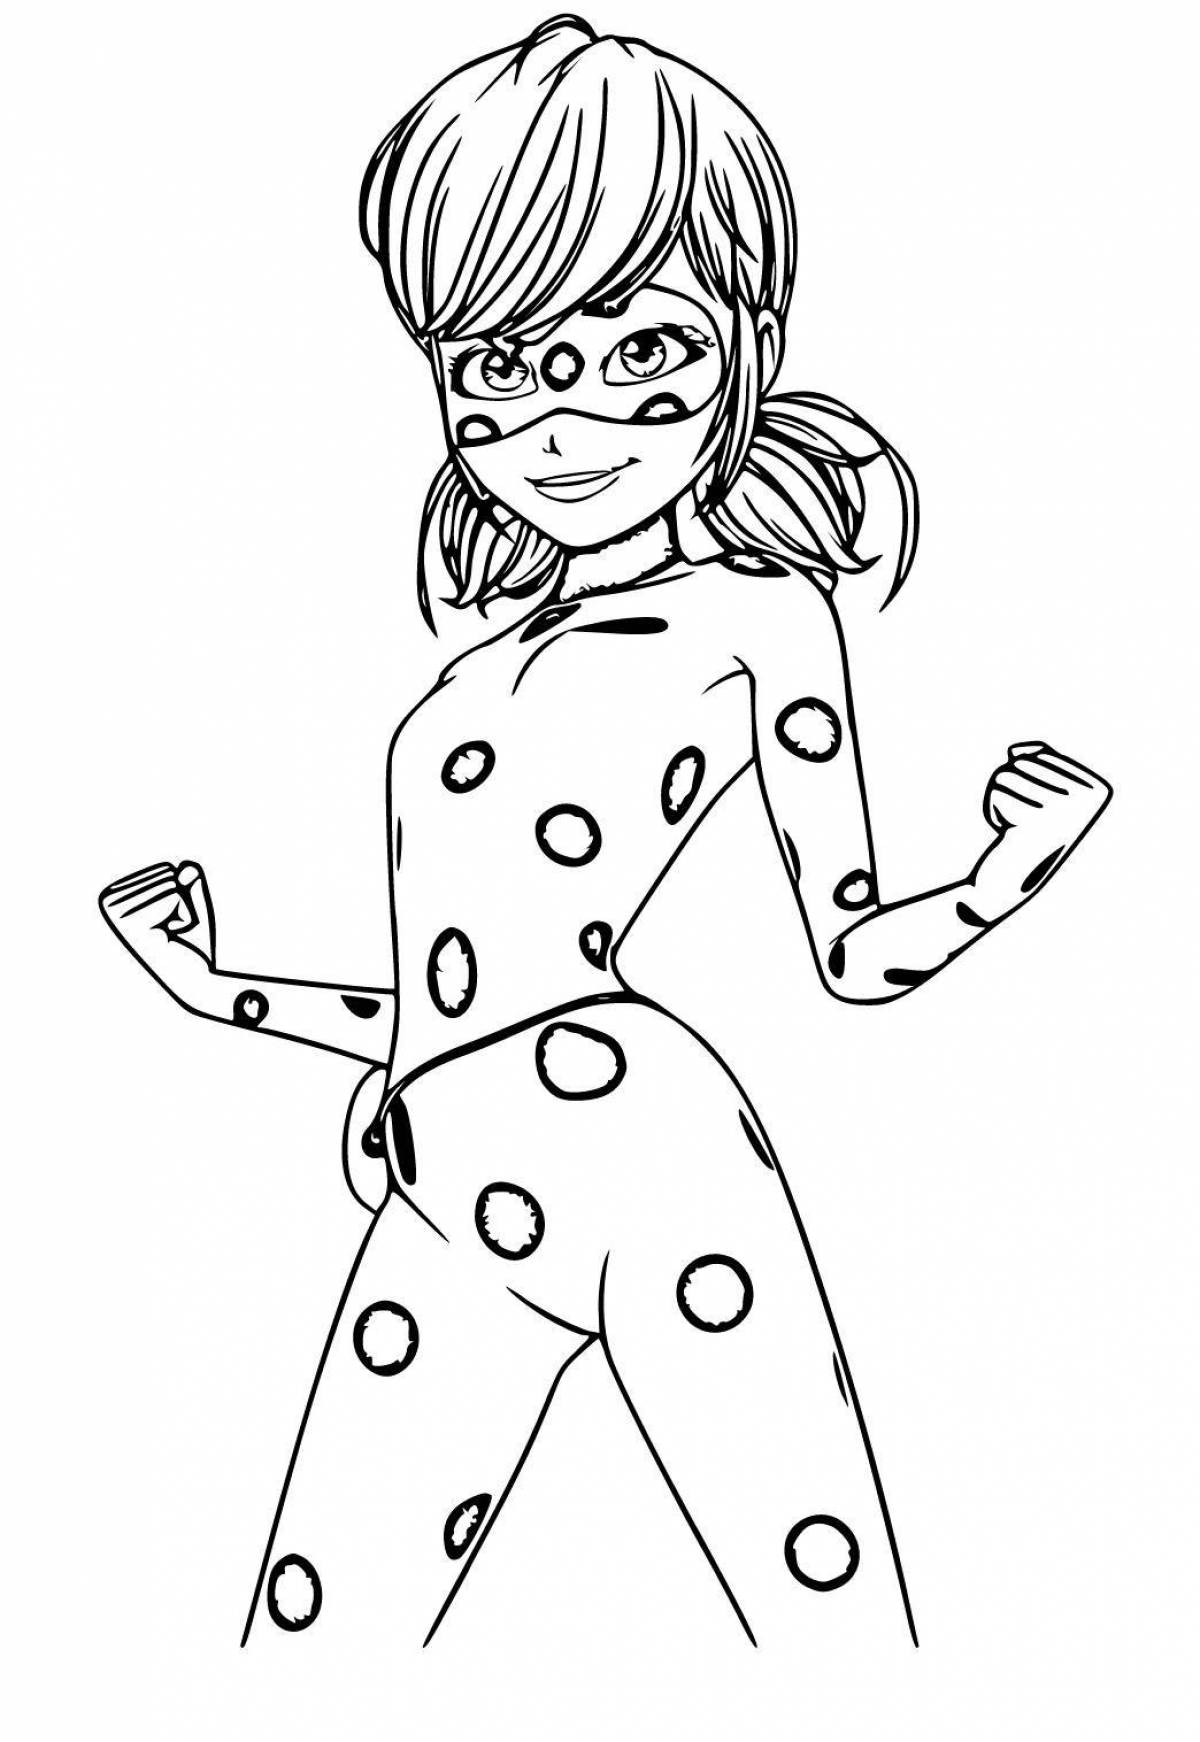 Coloring page with ladybug earrings